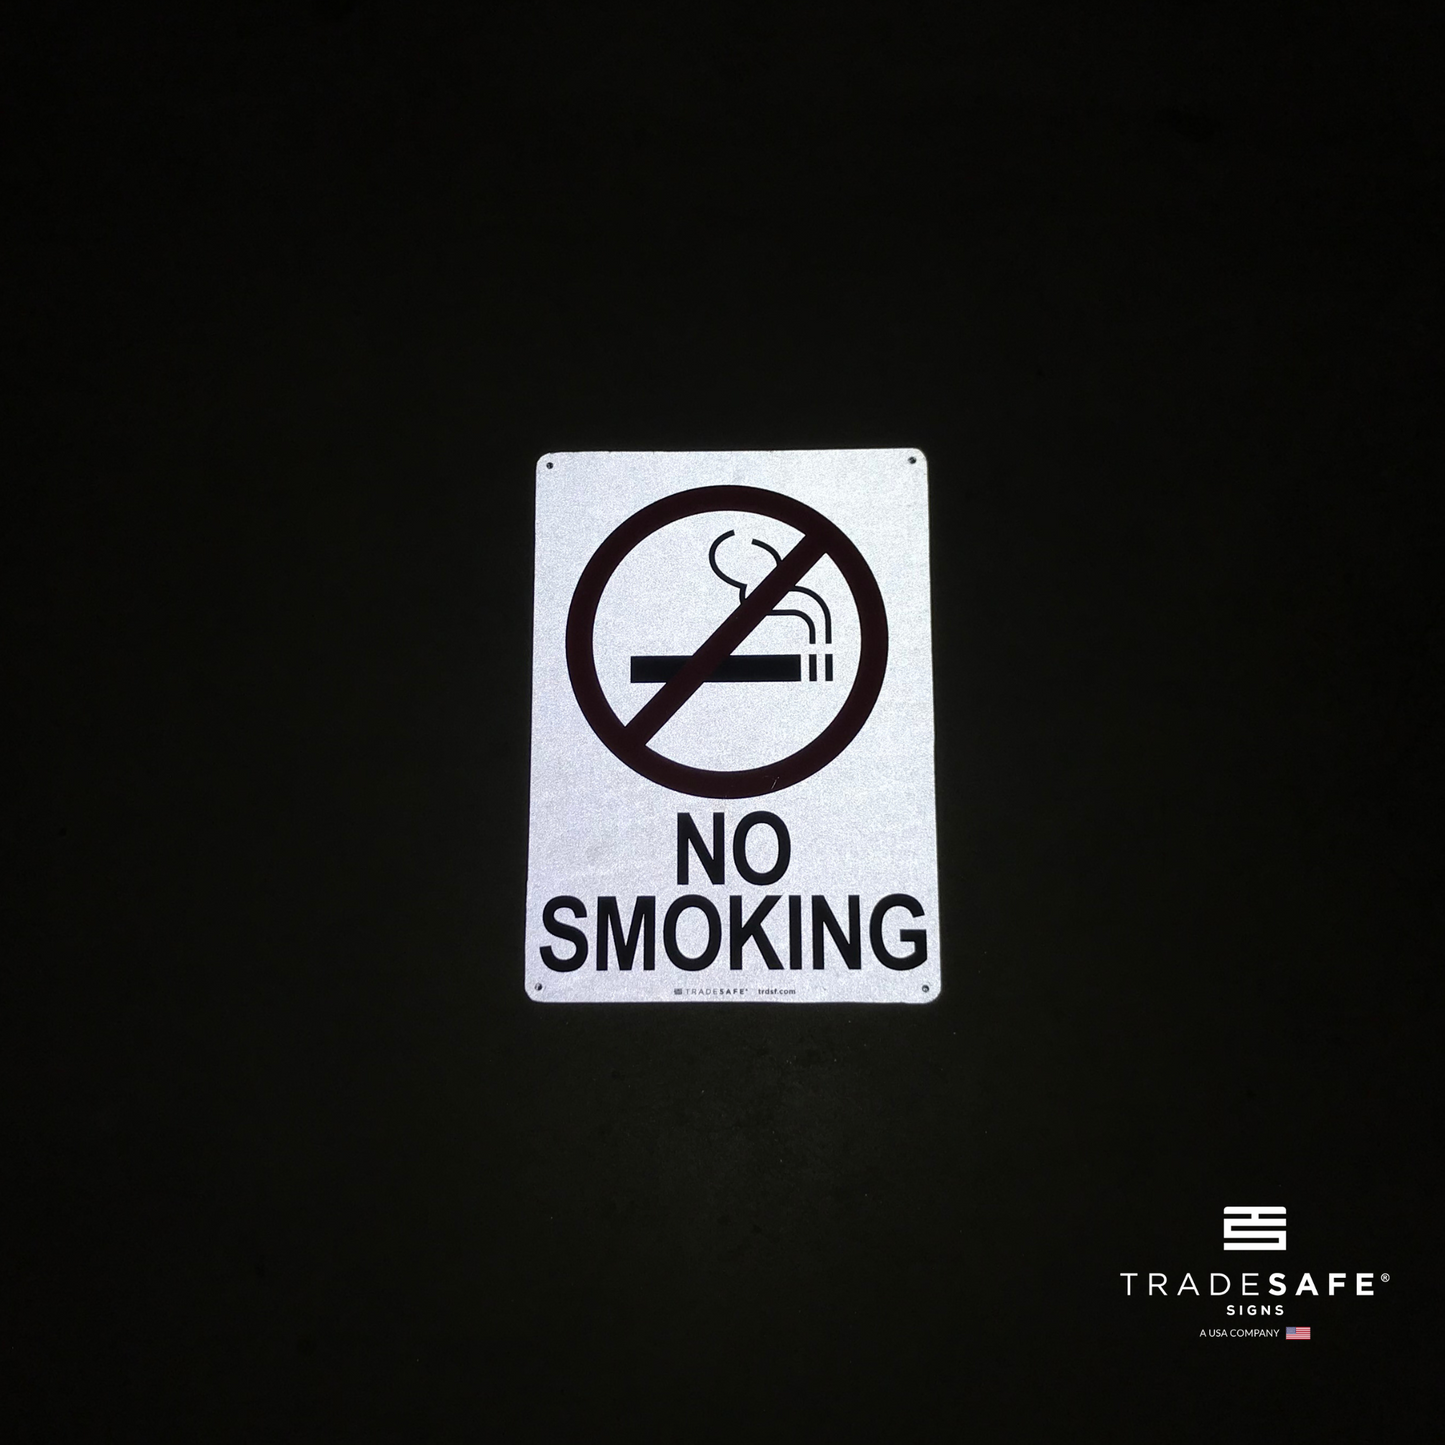 reflective attribute of no smoking sign on black background